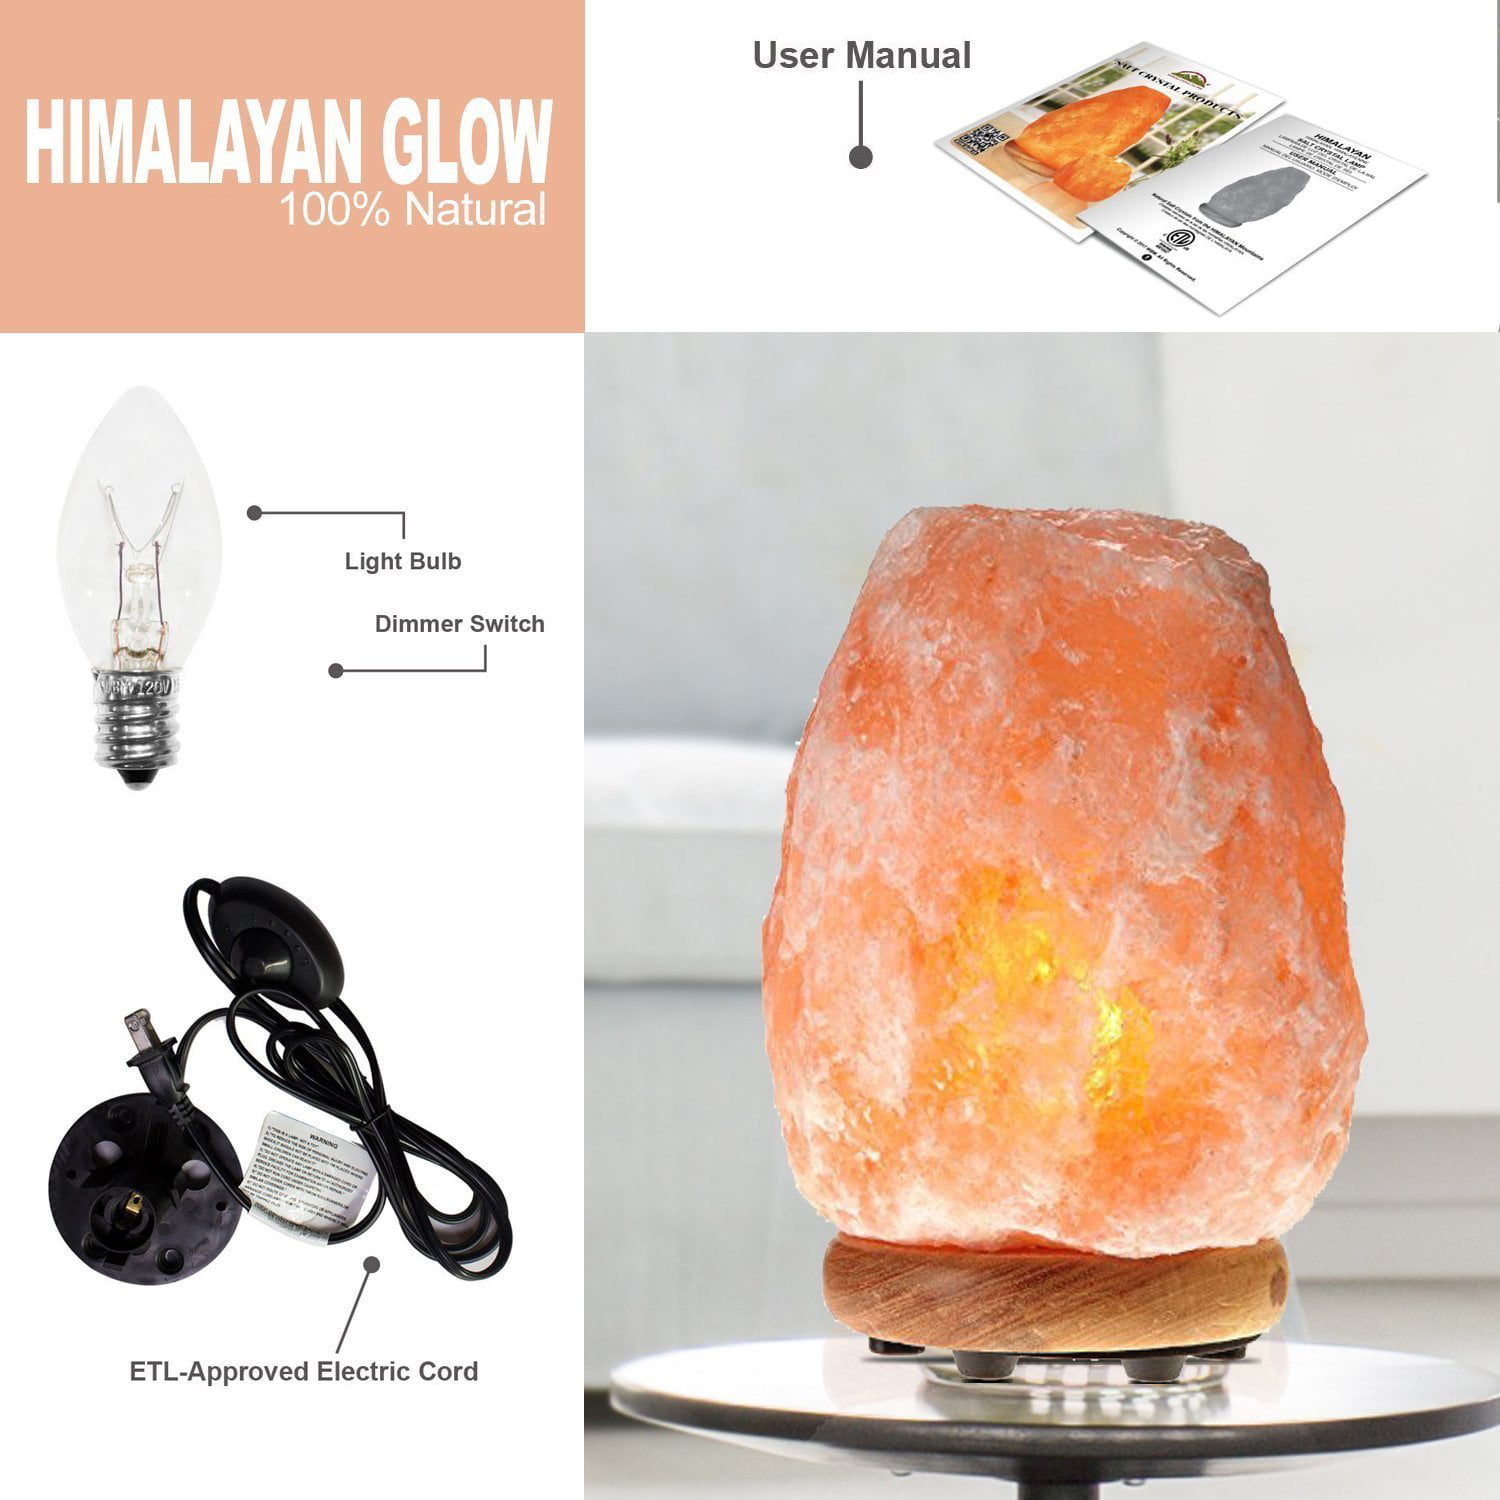 USB Drop-Shaped Night Light Crystal Salt Lamps for Home Décor Holiday Gifts FANHAO Himalayan Salt Lamp with 7 Colors Changing Real Wood Base LED Bulb 